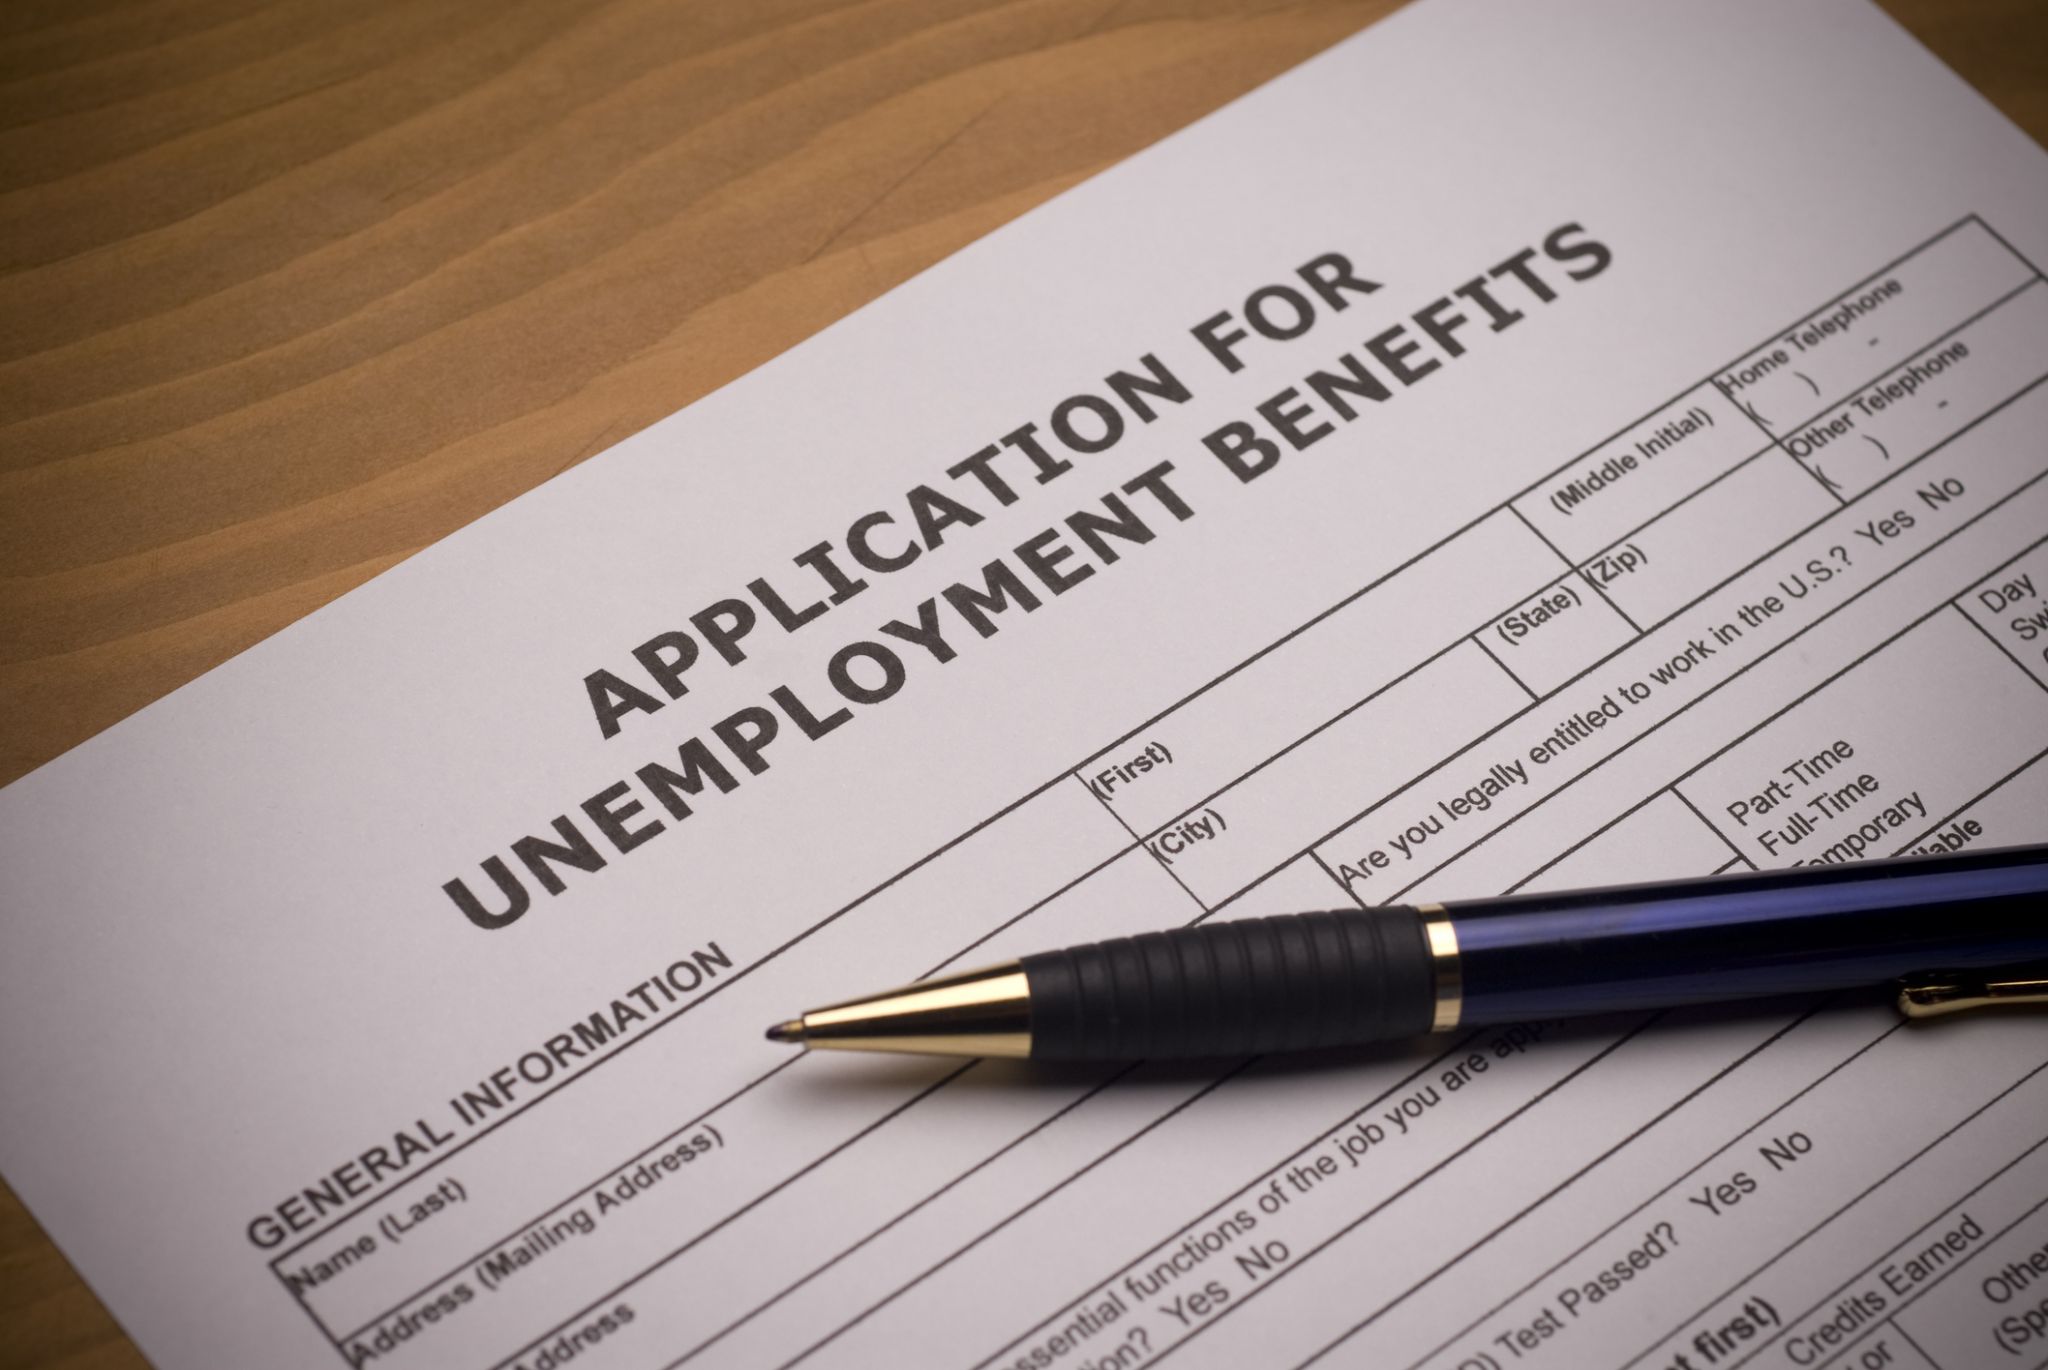 A stepbystep guide to file for unemployment benefits in Washington